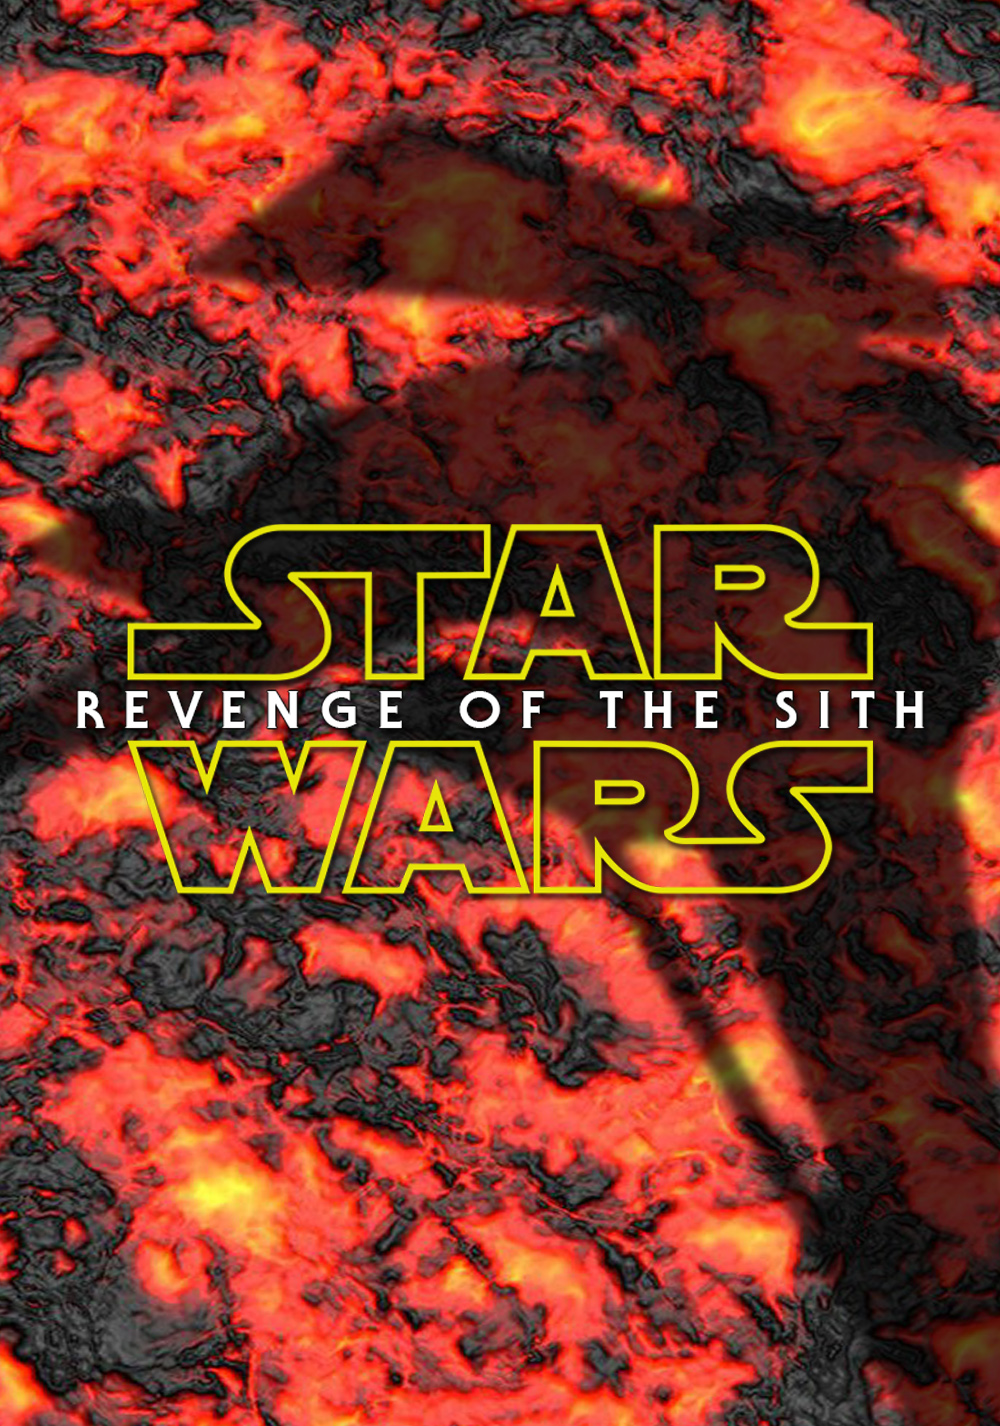 download the new Star Wars Ep. III: Revenge of the Sith